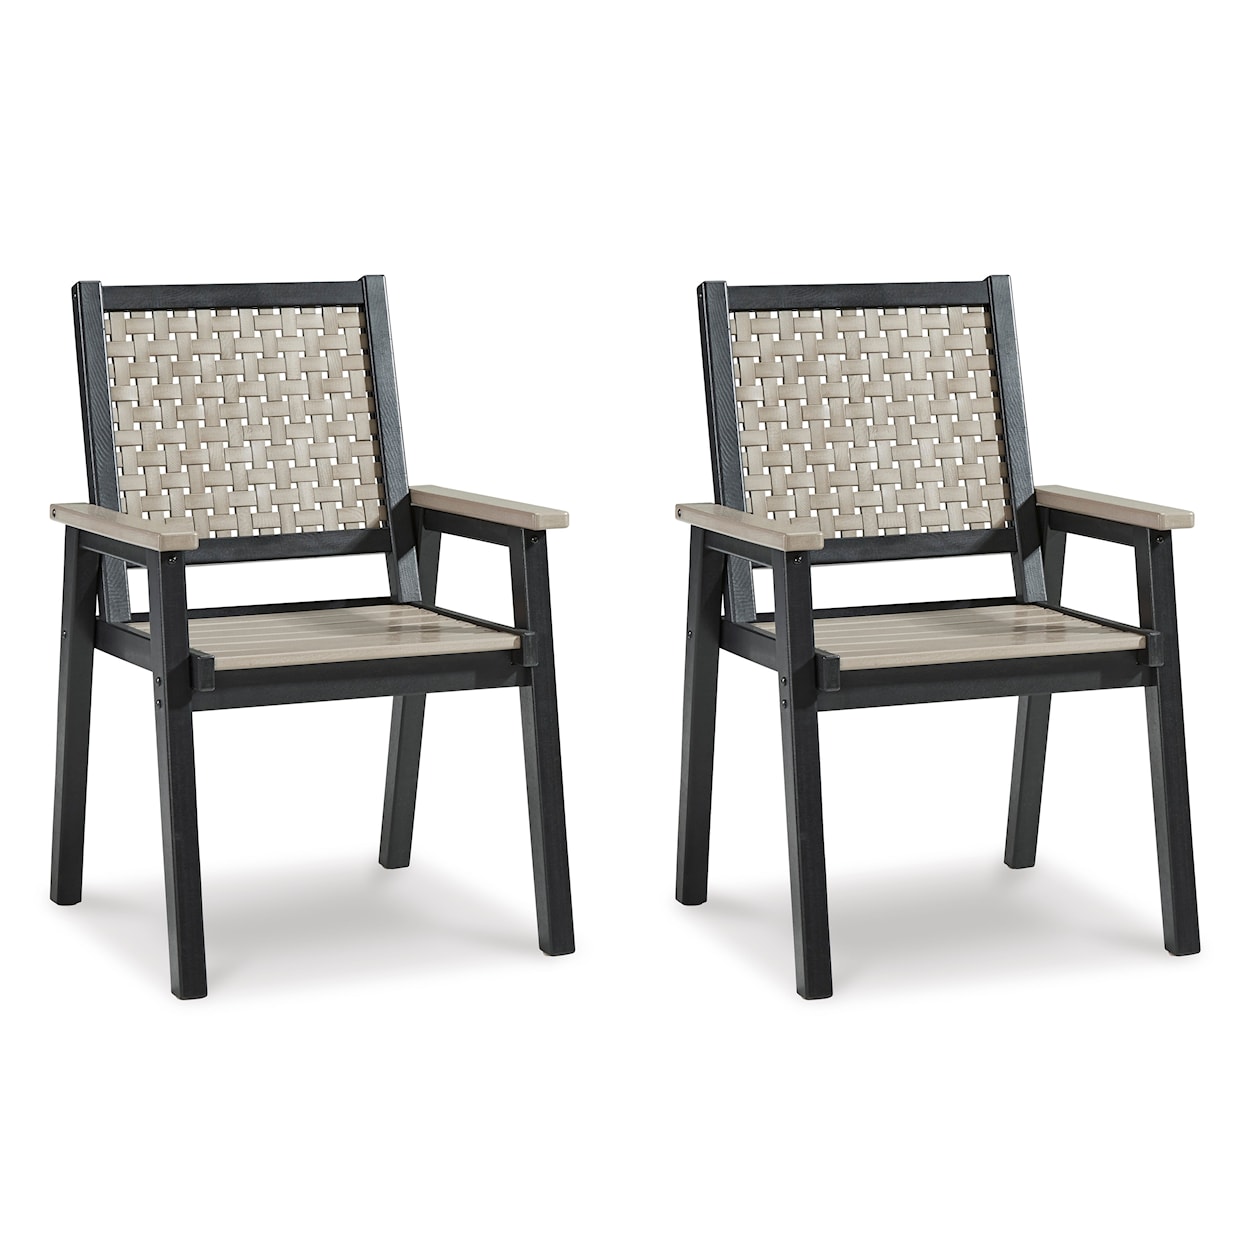 Ashley Furniture Signature Design Mount Valley Outdoor Dining Chair (Set of 2)